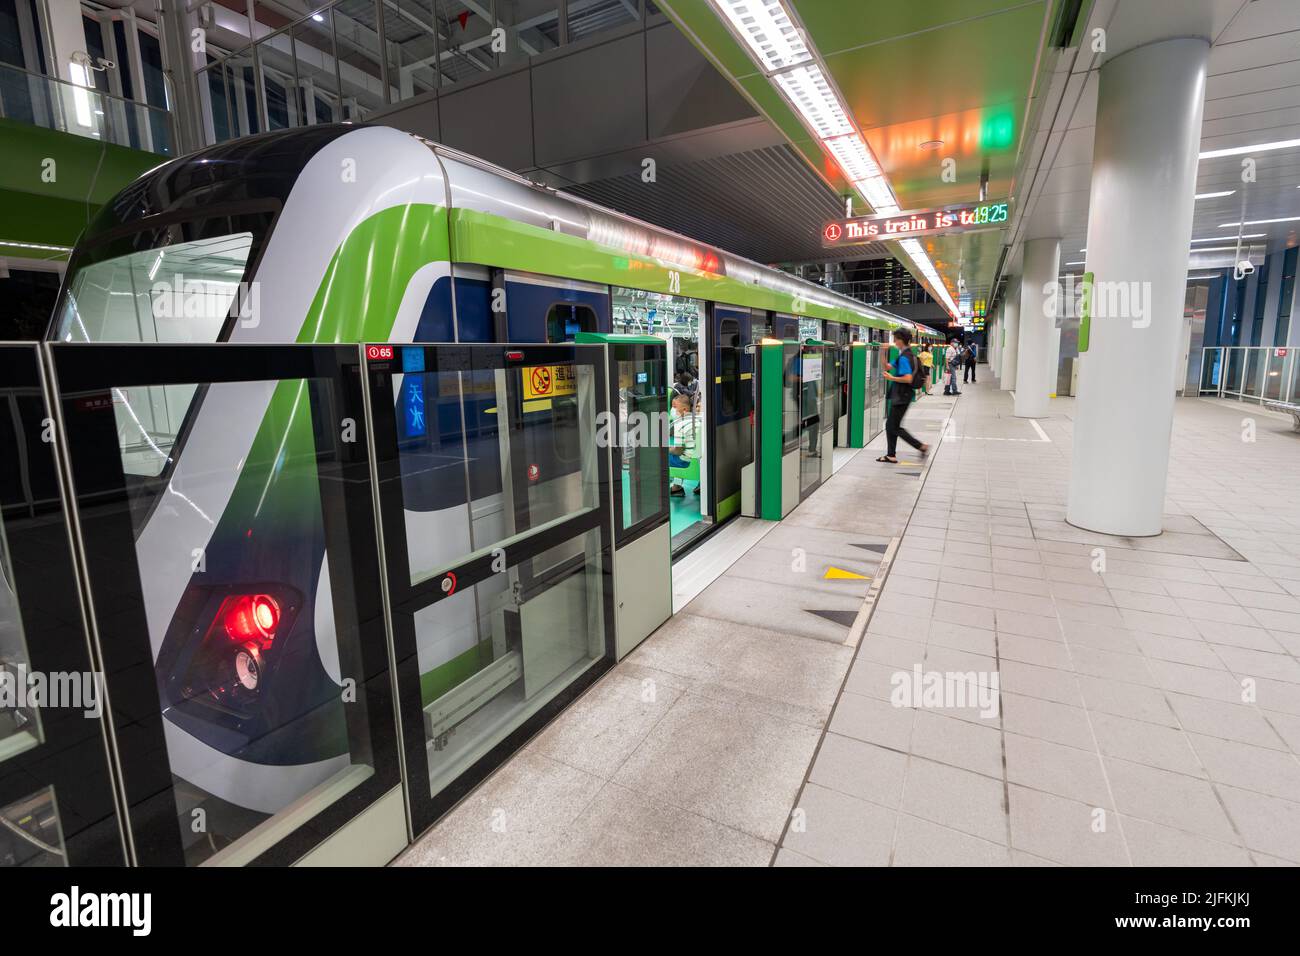 Taichung City, Taiwan - July 3, 2022 : Taichung MRT Metro system Green line train stop at the Shui-an Temple metro station platform screen doors. Stock Photo